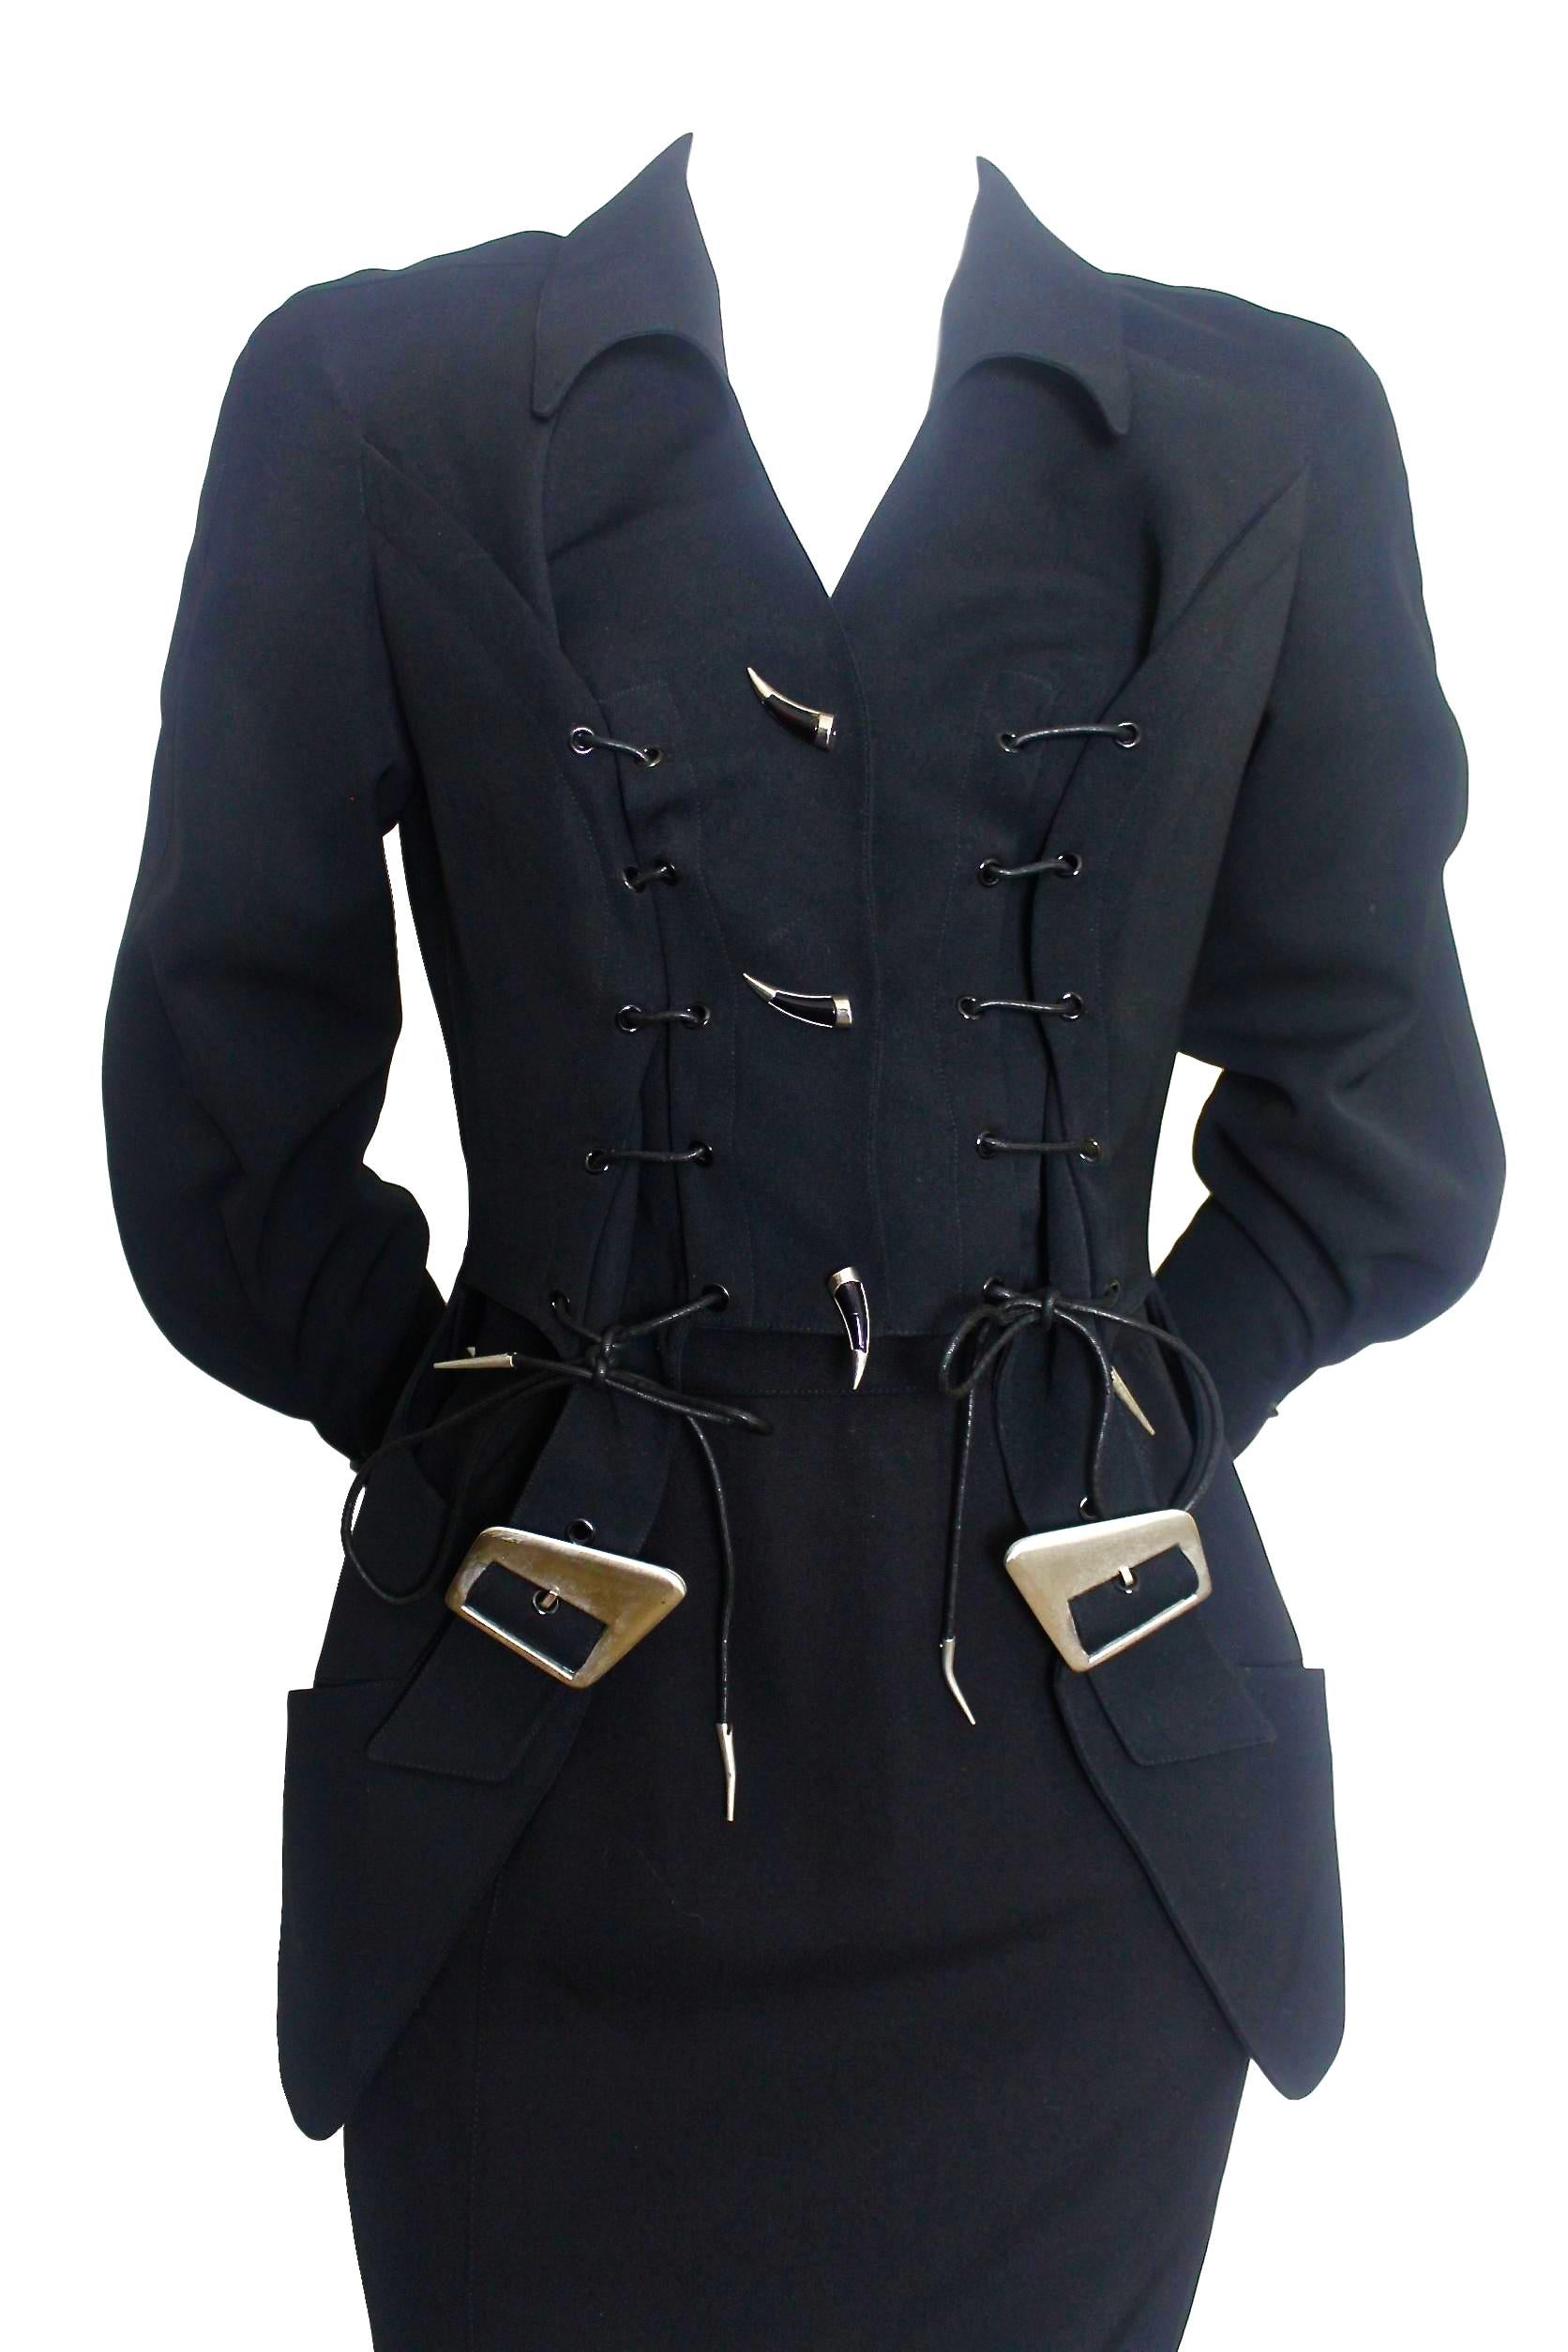 Thierry Mugler 1992 Runway Holster Jacket and Skirt In Excellent Condition For Sale In Bath, GB